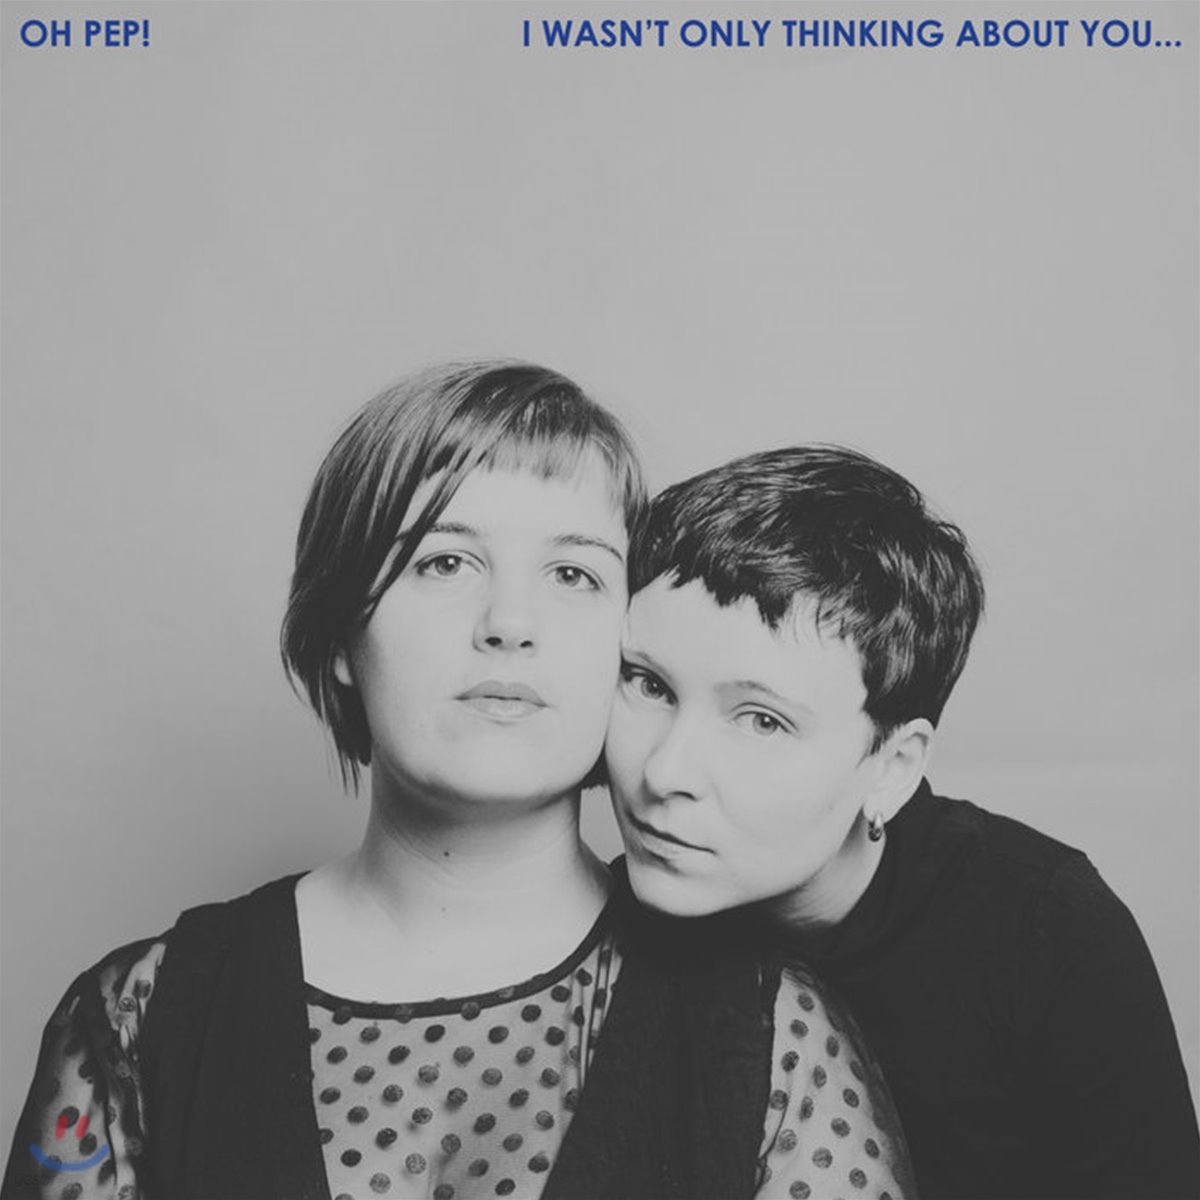 Oh Pep! (오 펩!) - I Wasn't Only Thinking About You 정규 2집 [LP]